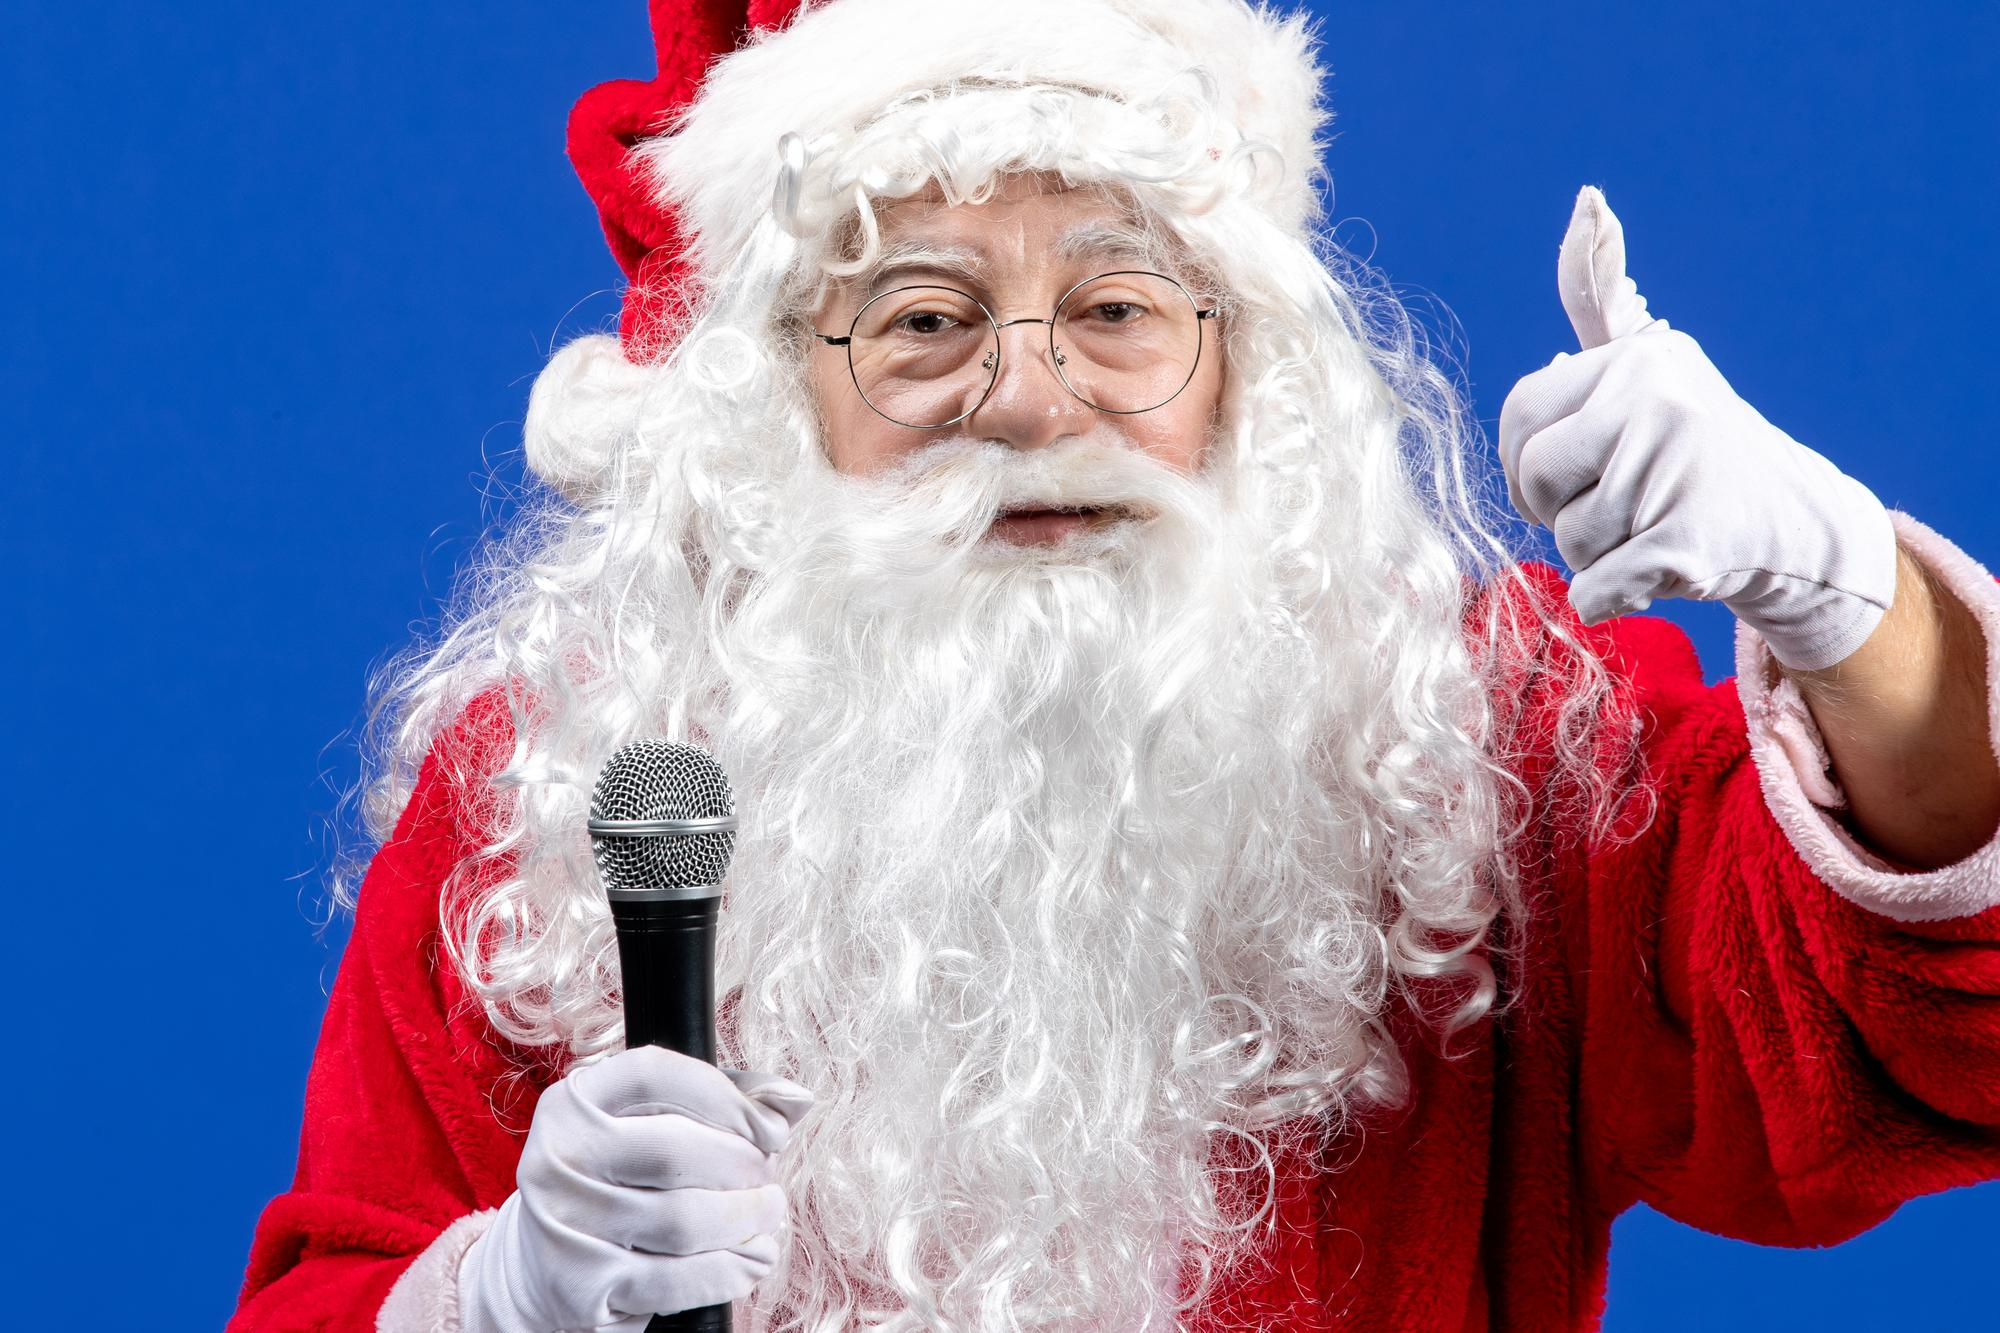 front-view-santa-claus-with-red-suit-white-beard-holding-mic-blue-color-holiday-xmas-new-year.jpg